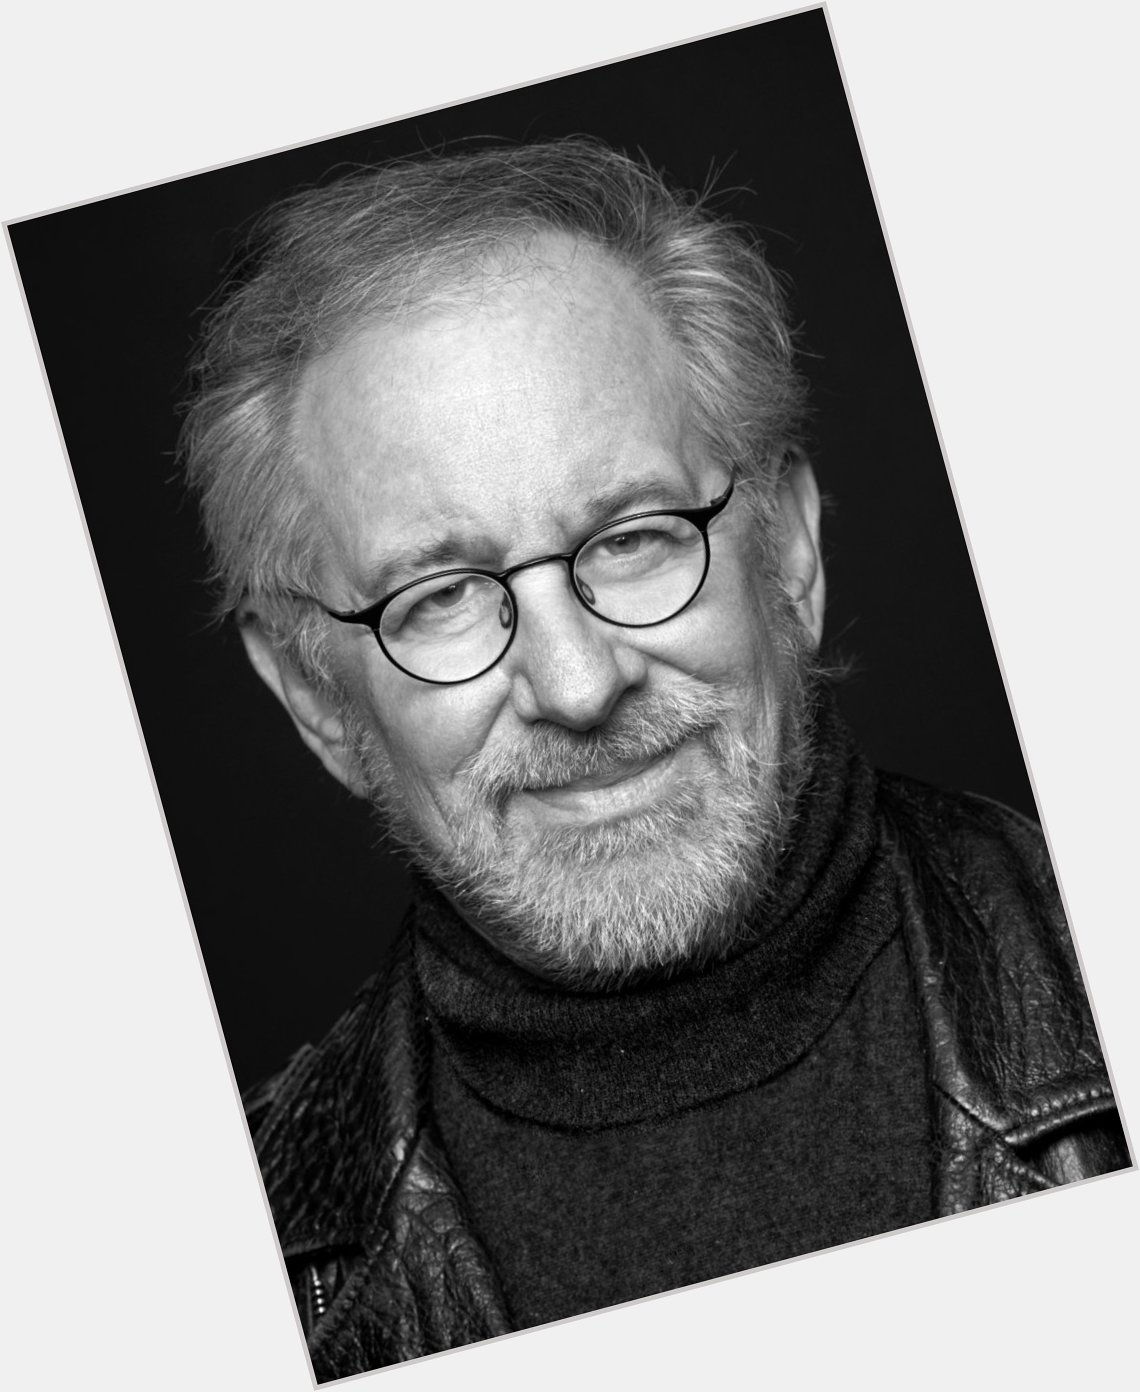 Happy Birthday to the great Steven Spielberg, who turns 71 today! (December 18, 1946) 